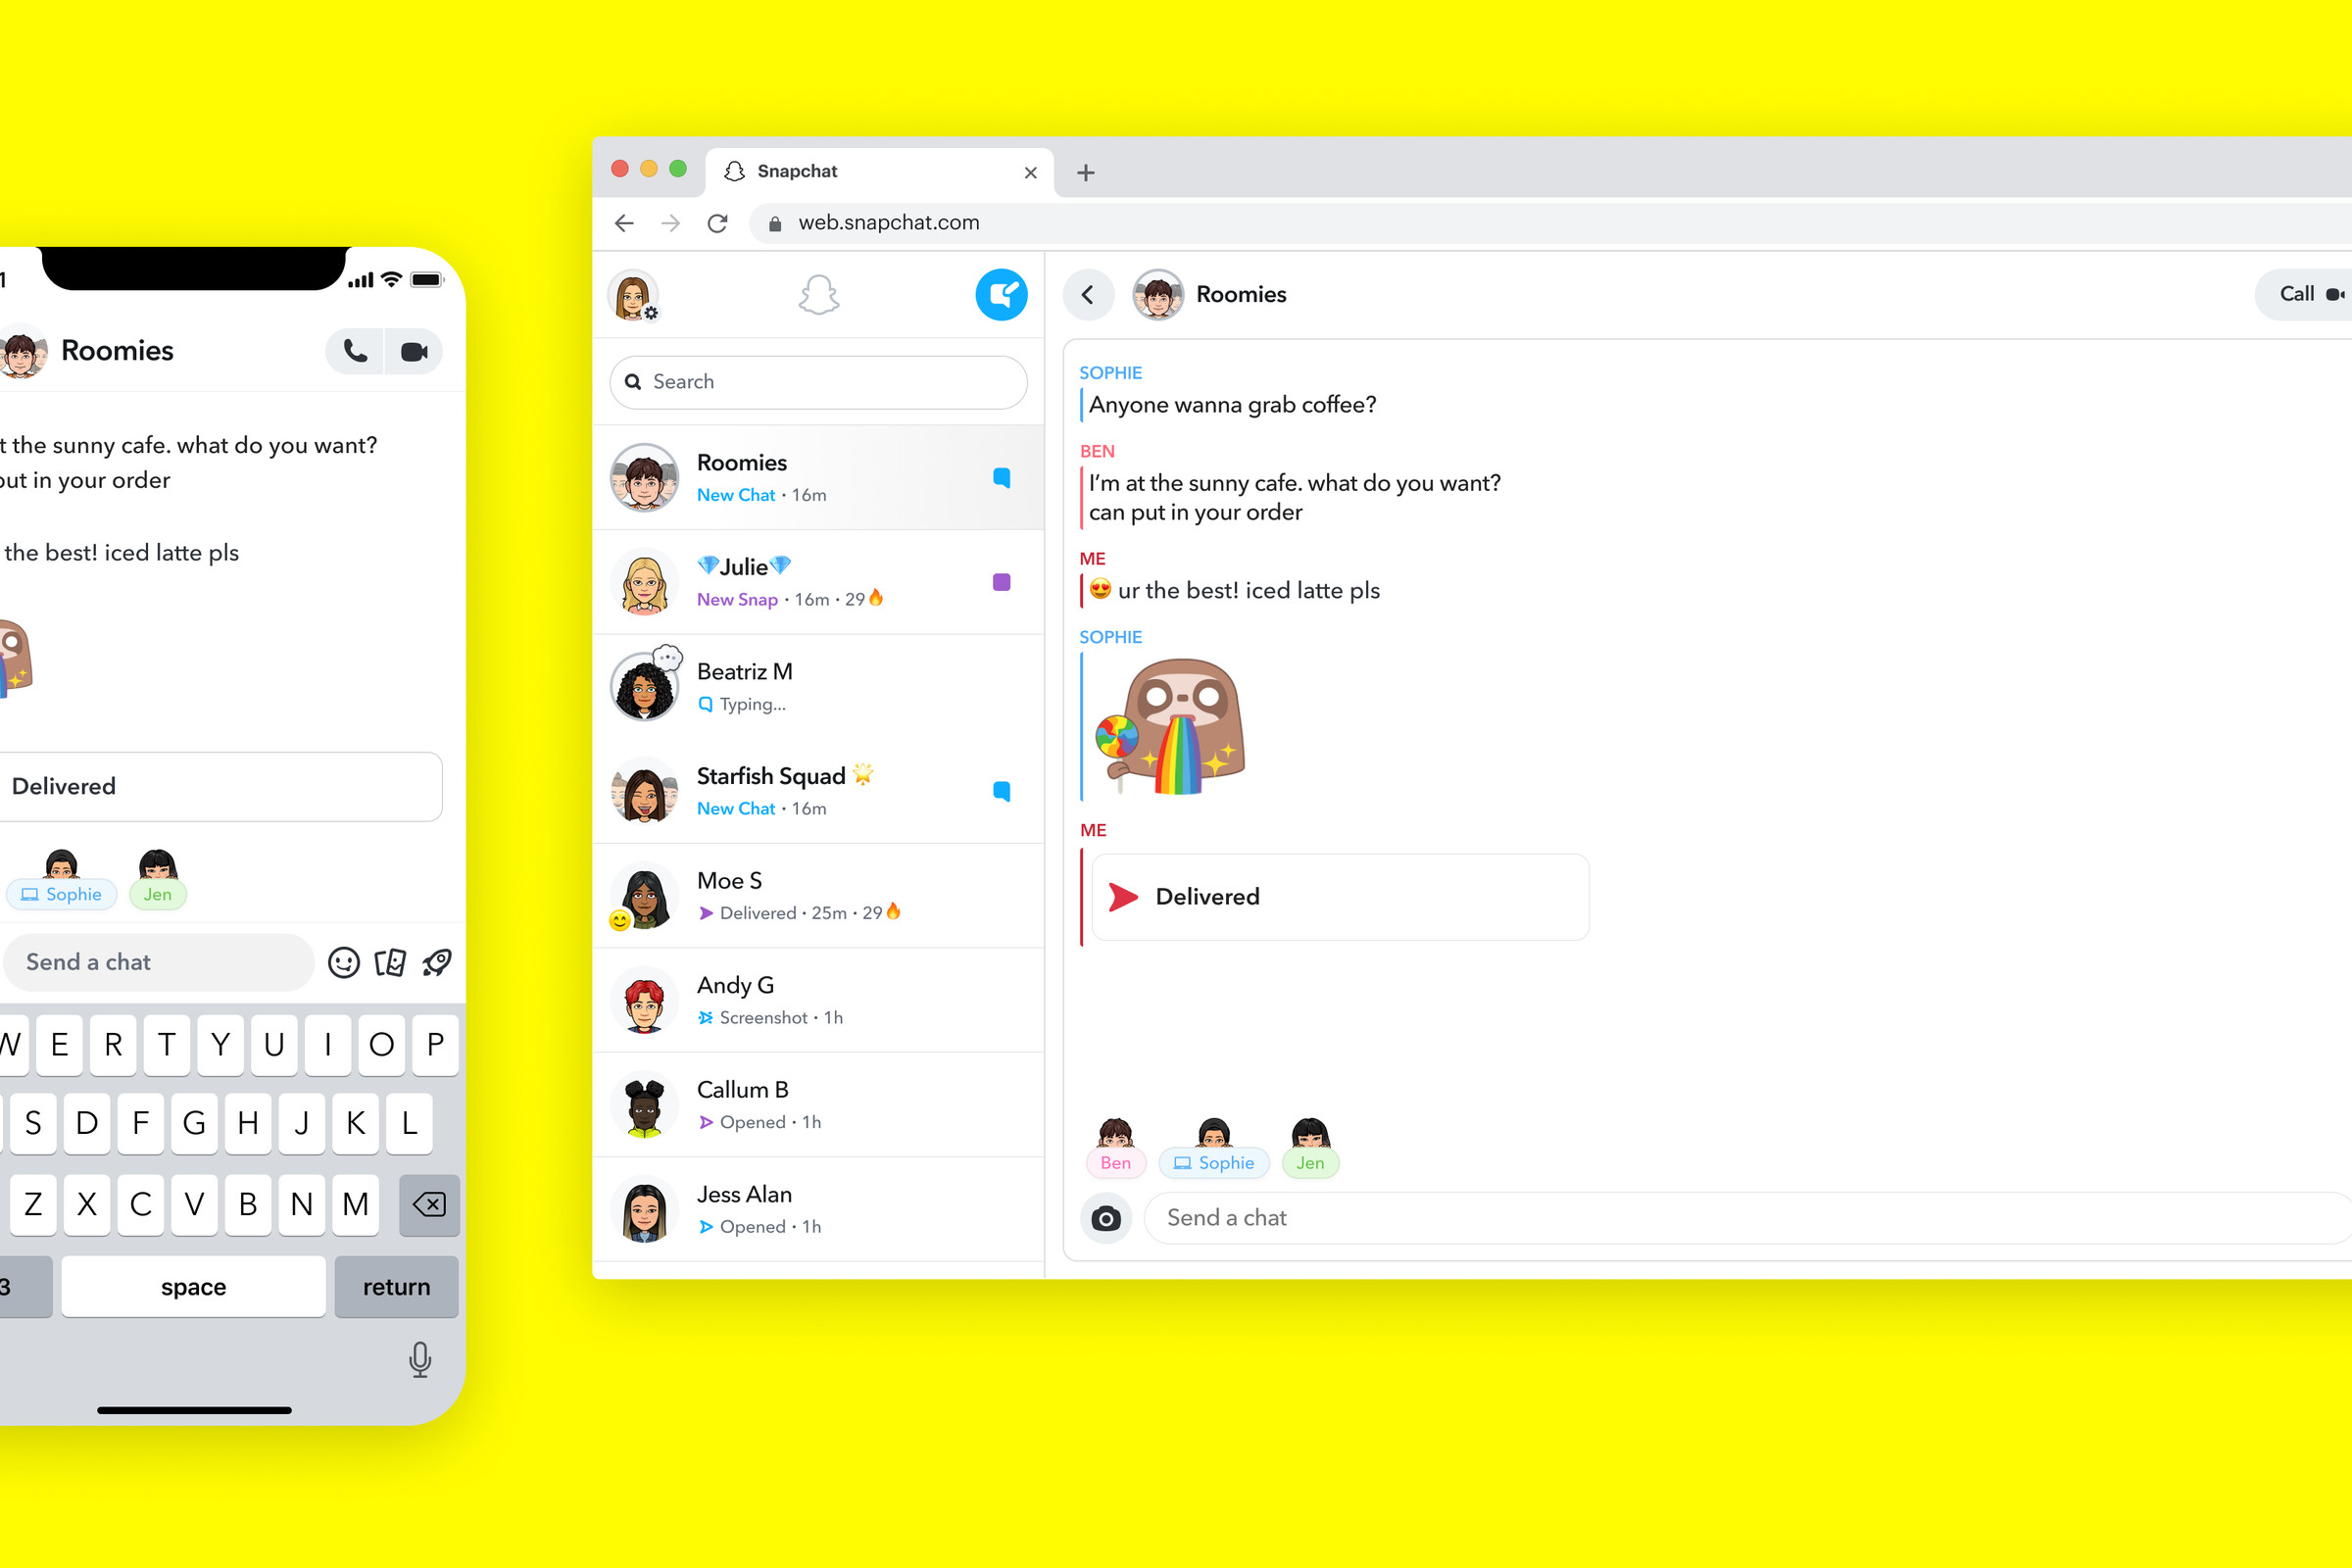 Views of the Snapchat mobile app and desktop version